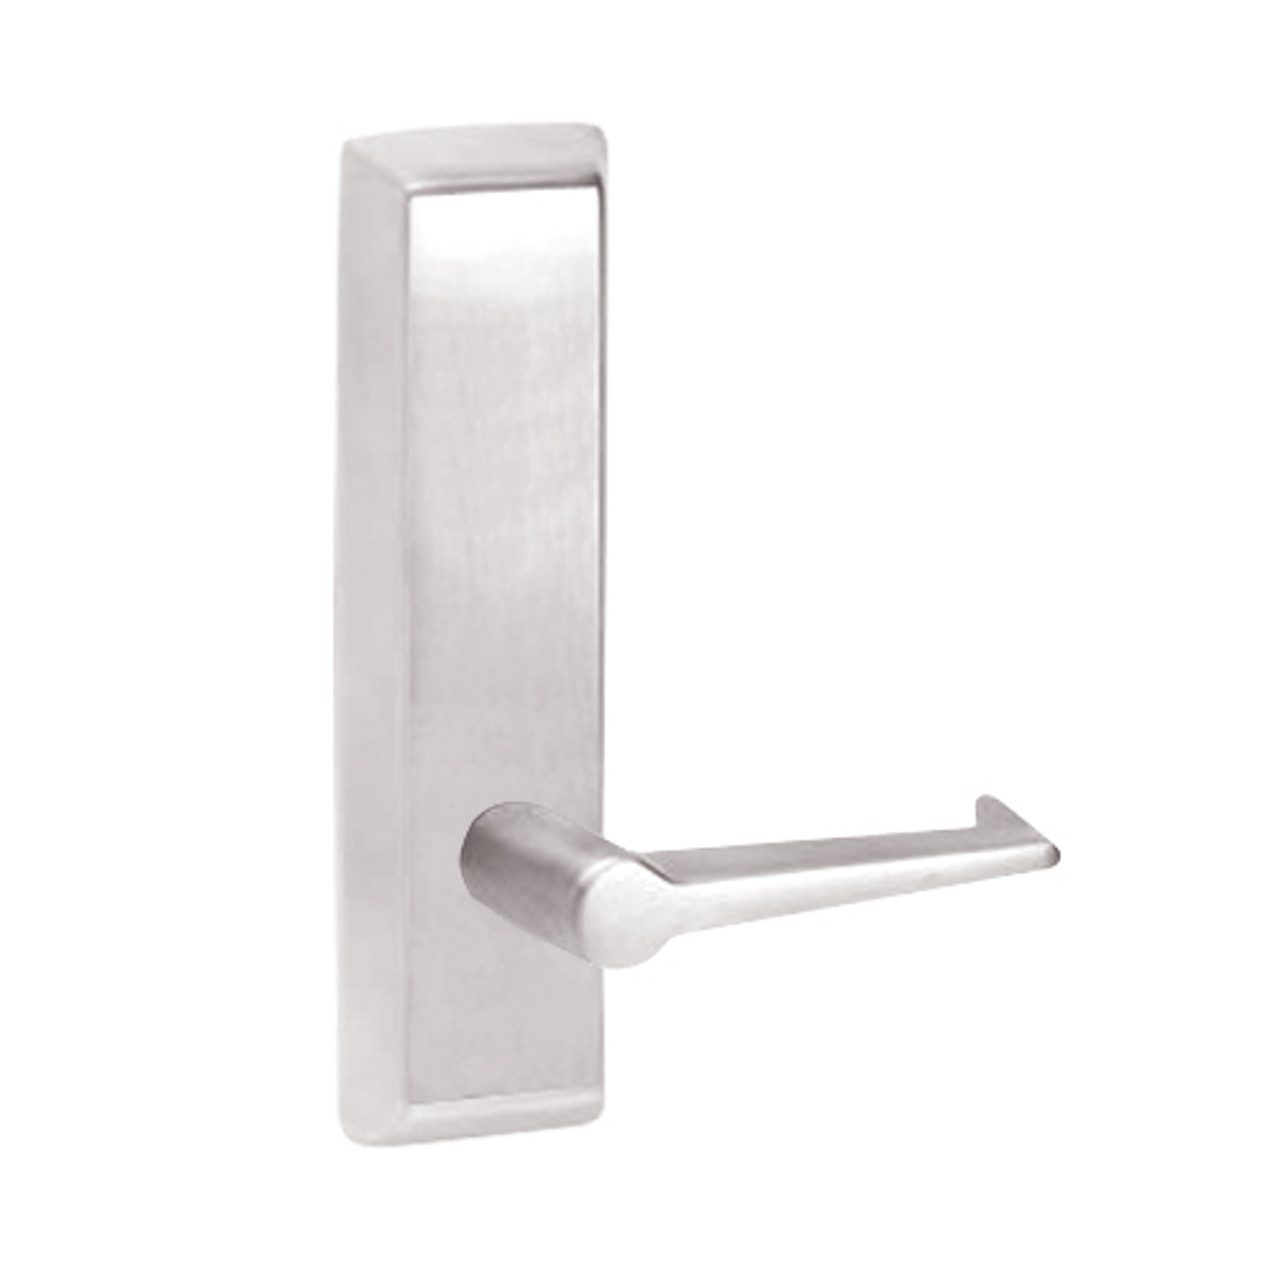 E955-629-RHR Corbin ED5000 Series Exit Device Trim with Classroom Essex Lever in Bright Stainless Steel Finish